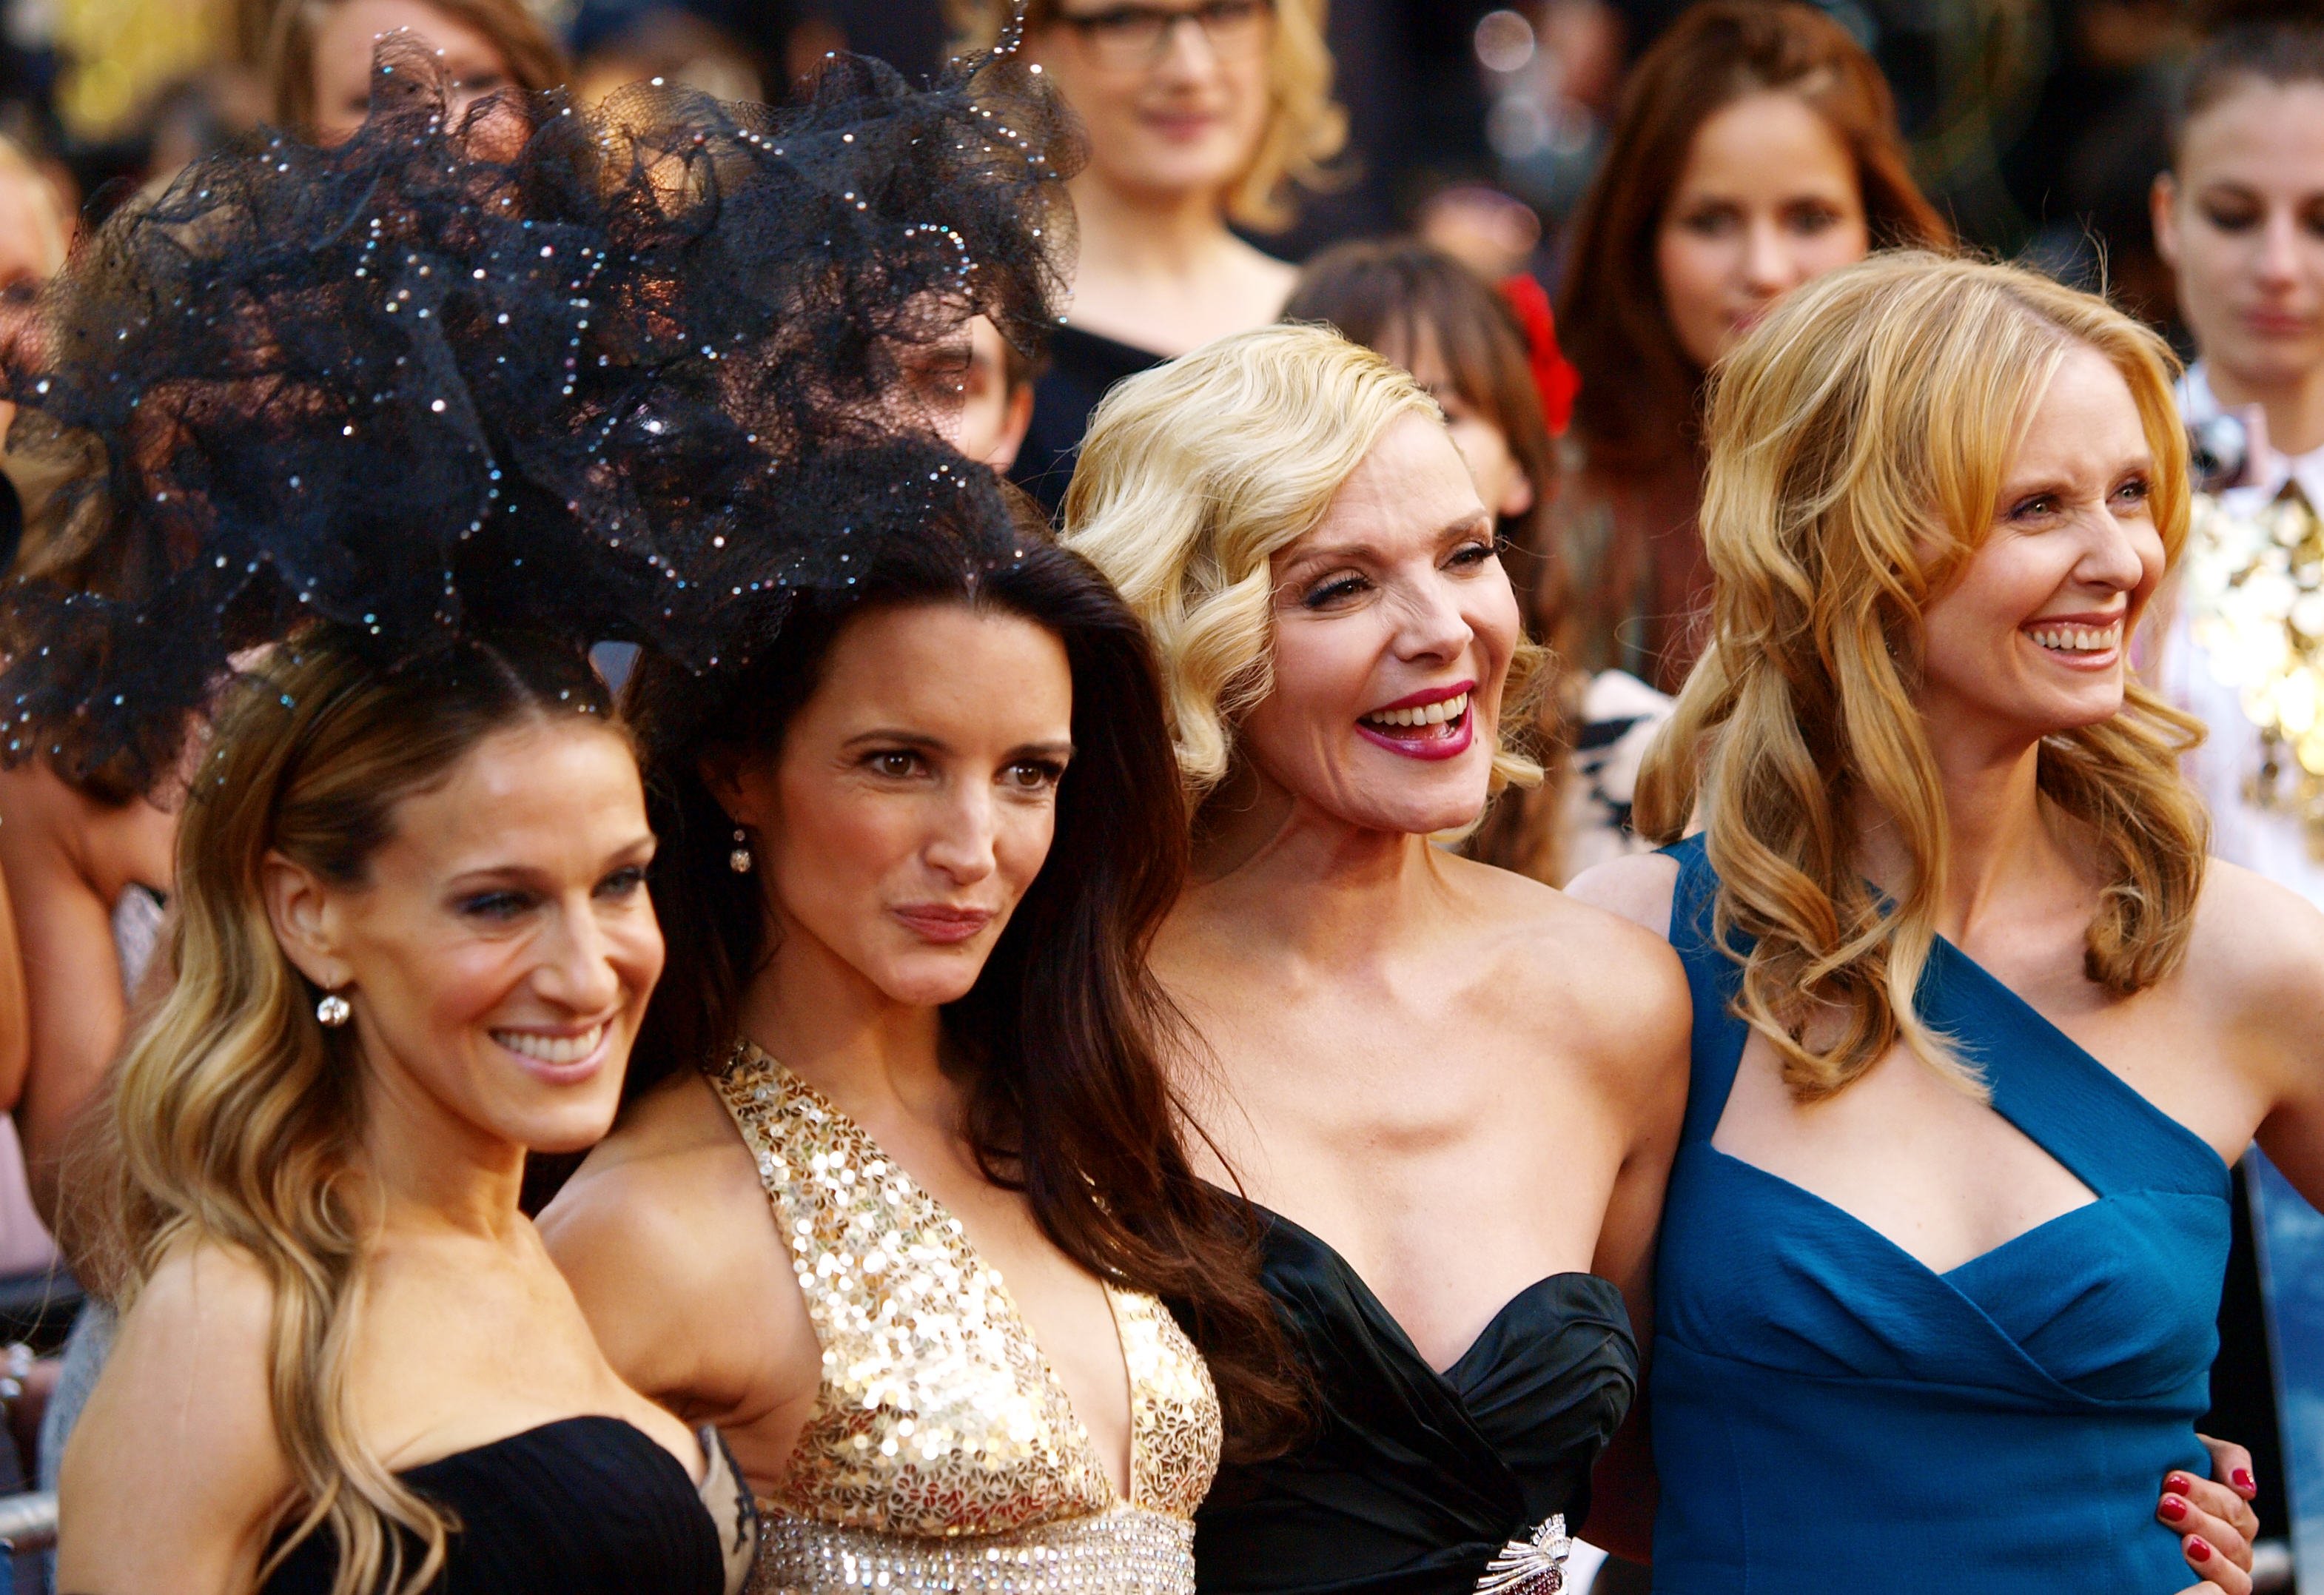 Kim cattrall wanted to be paid the same as sarah jessica parker on sex and the city